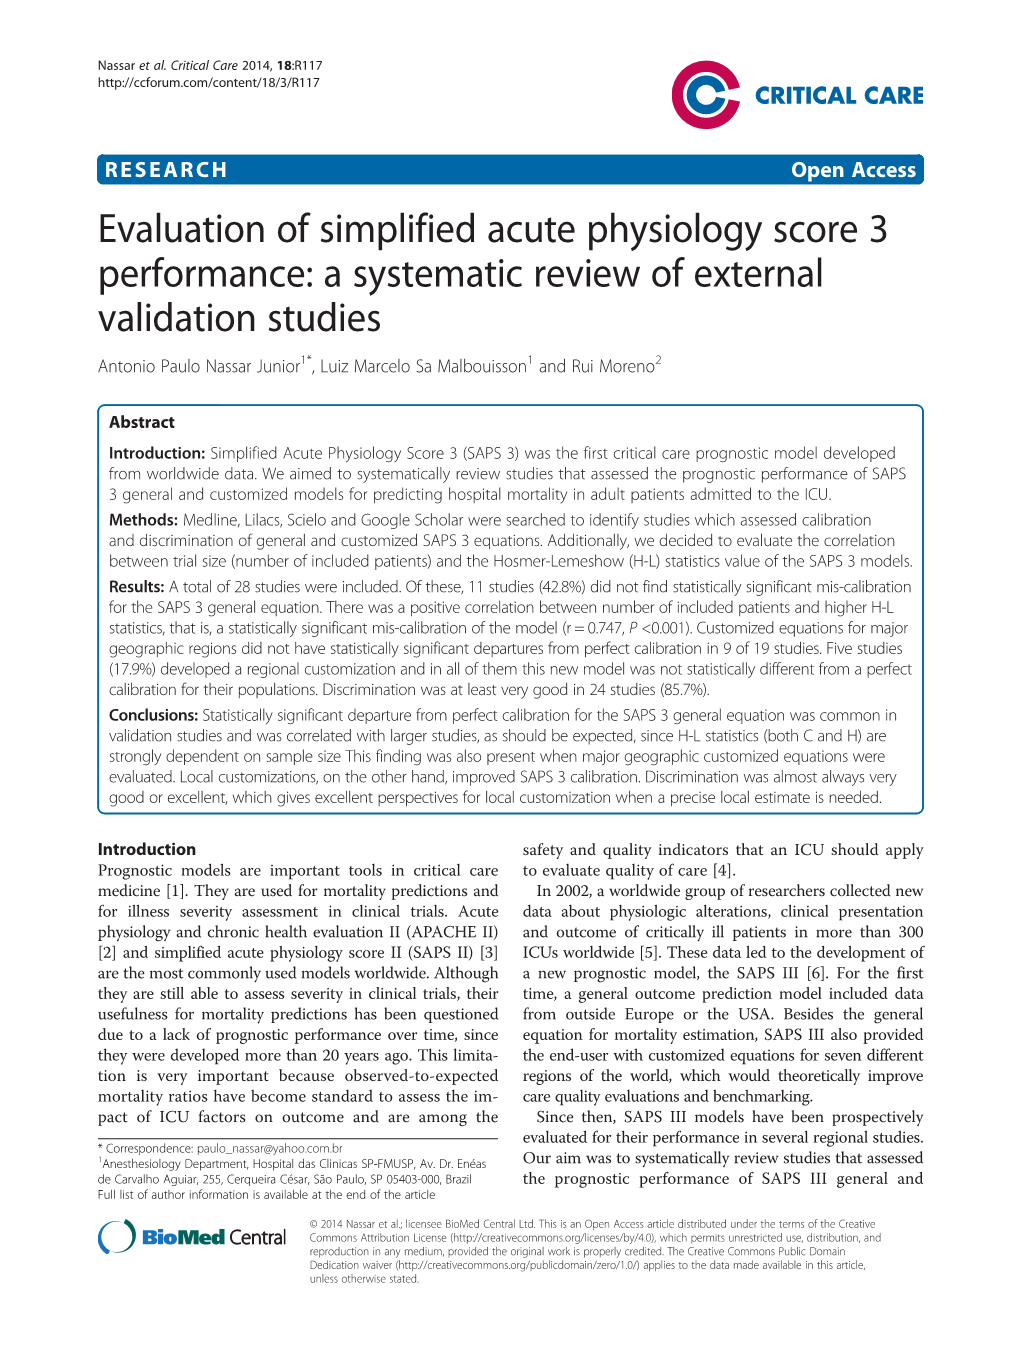 Evaluation of Simplified Acute Physiology Score 3 Performance